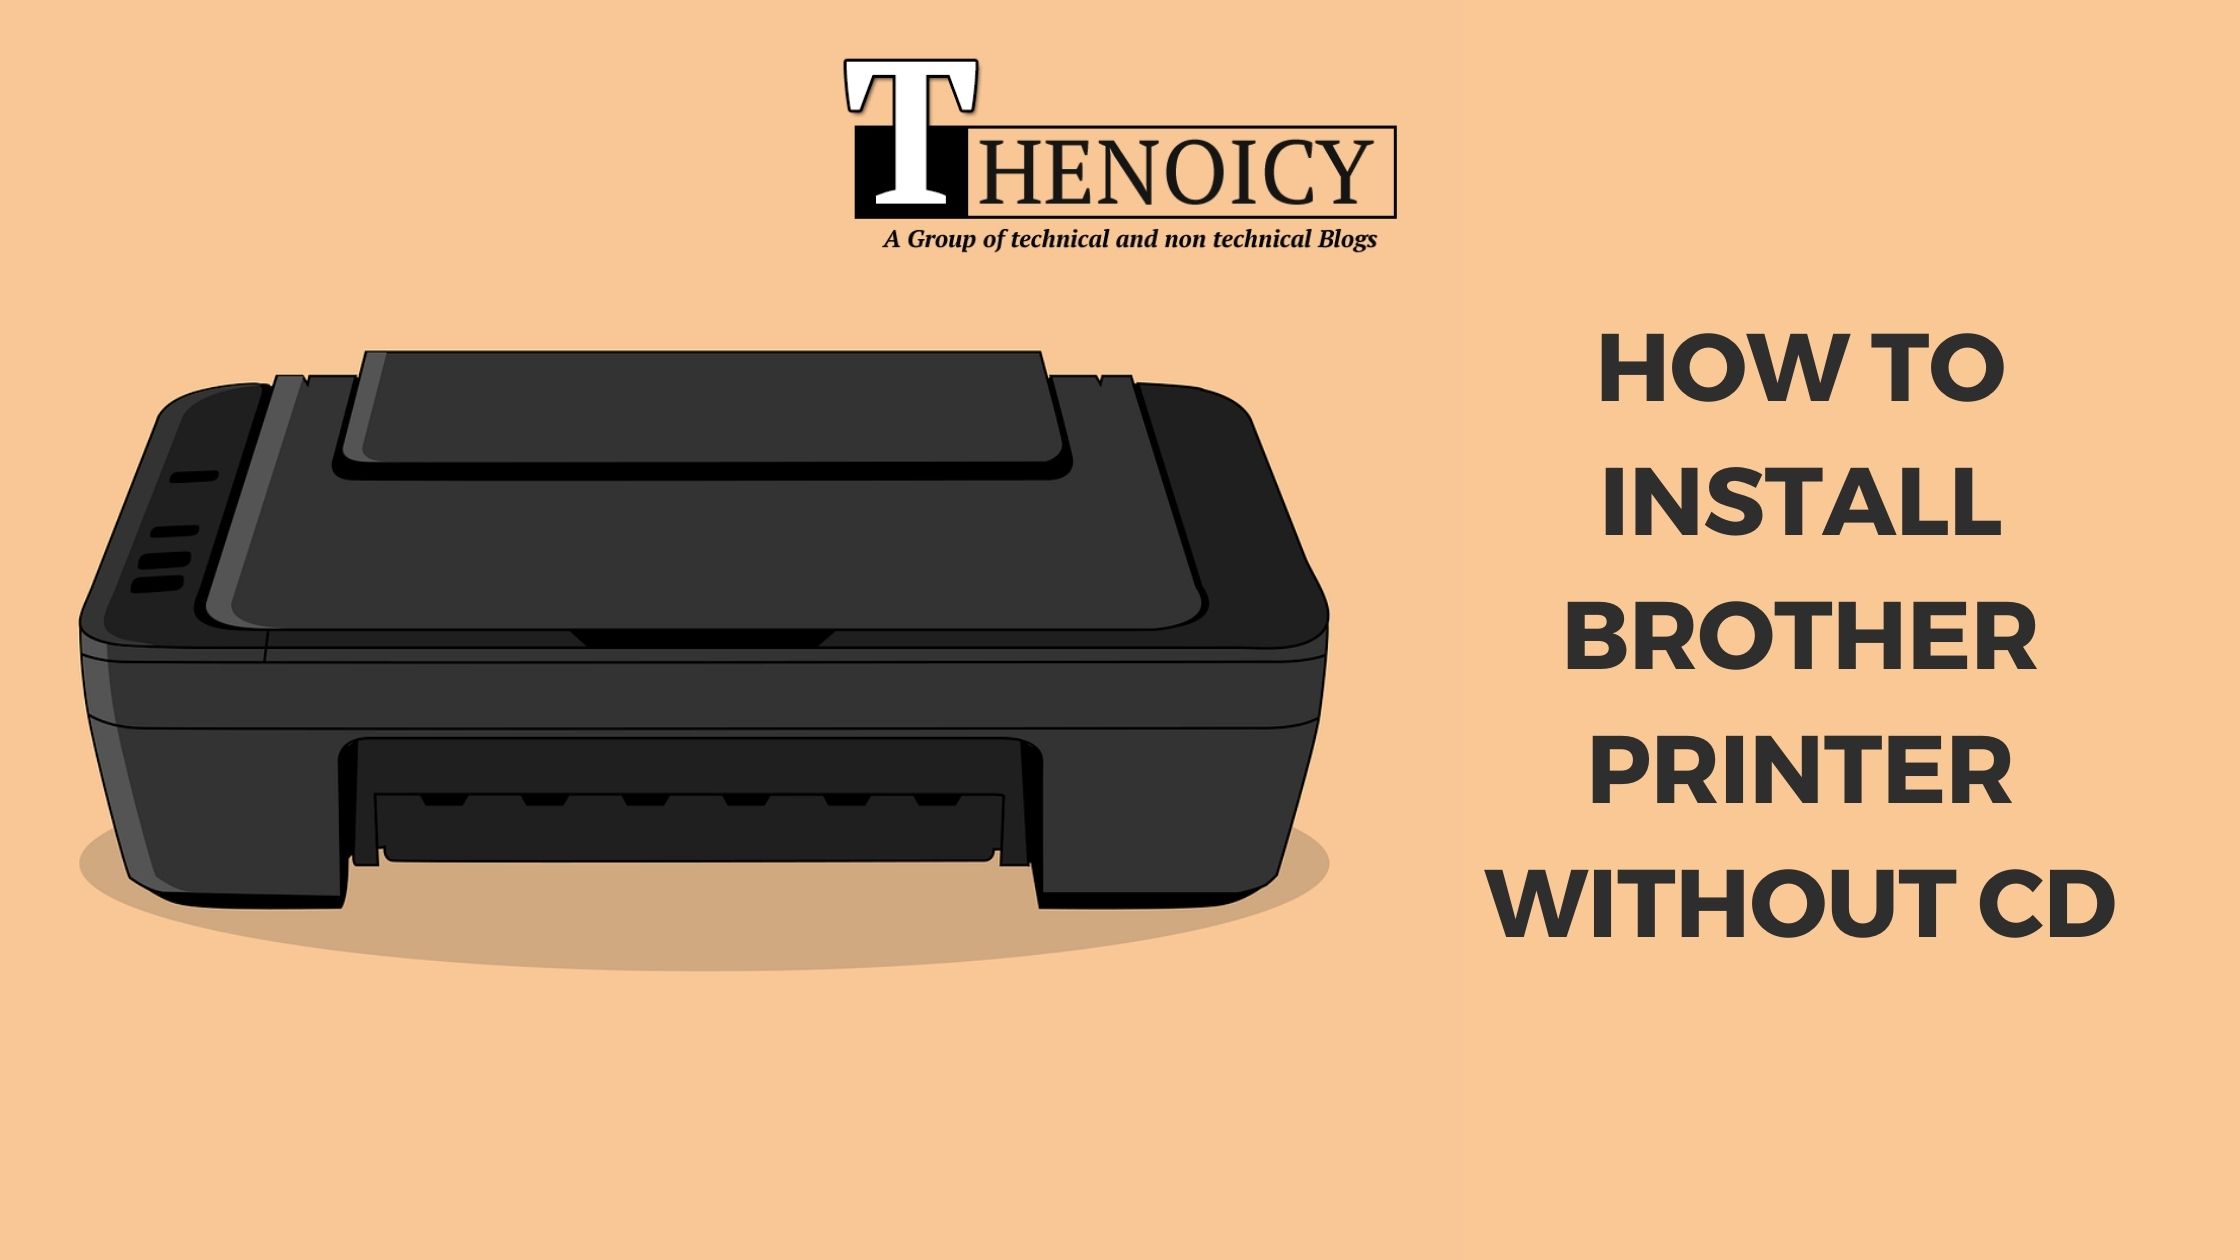 How To Install Brother Printer Without CD